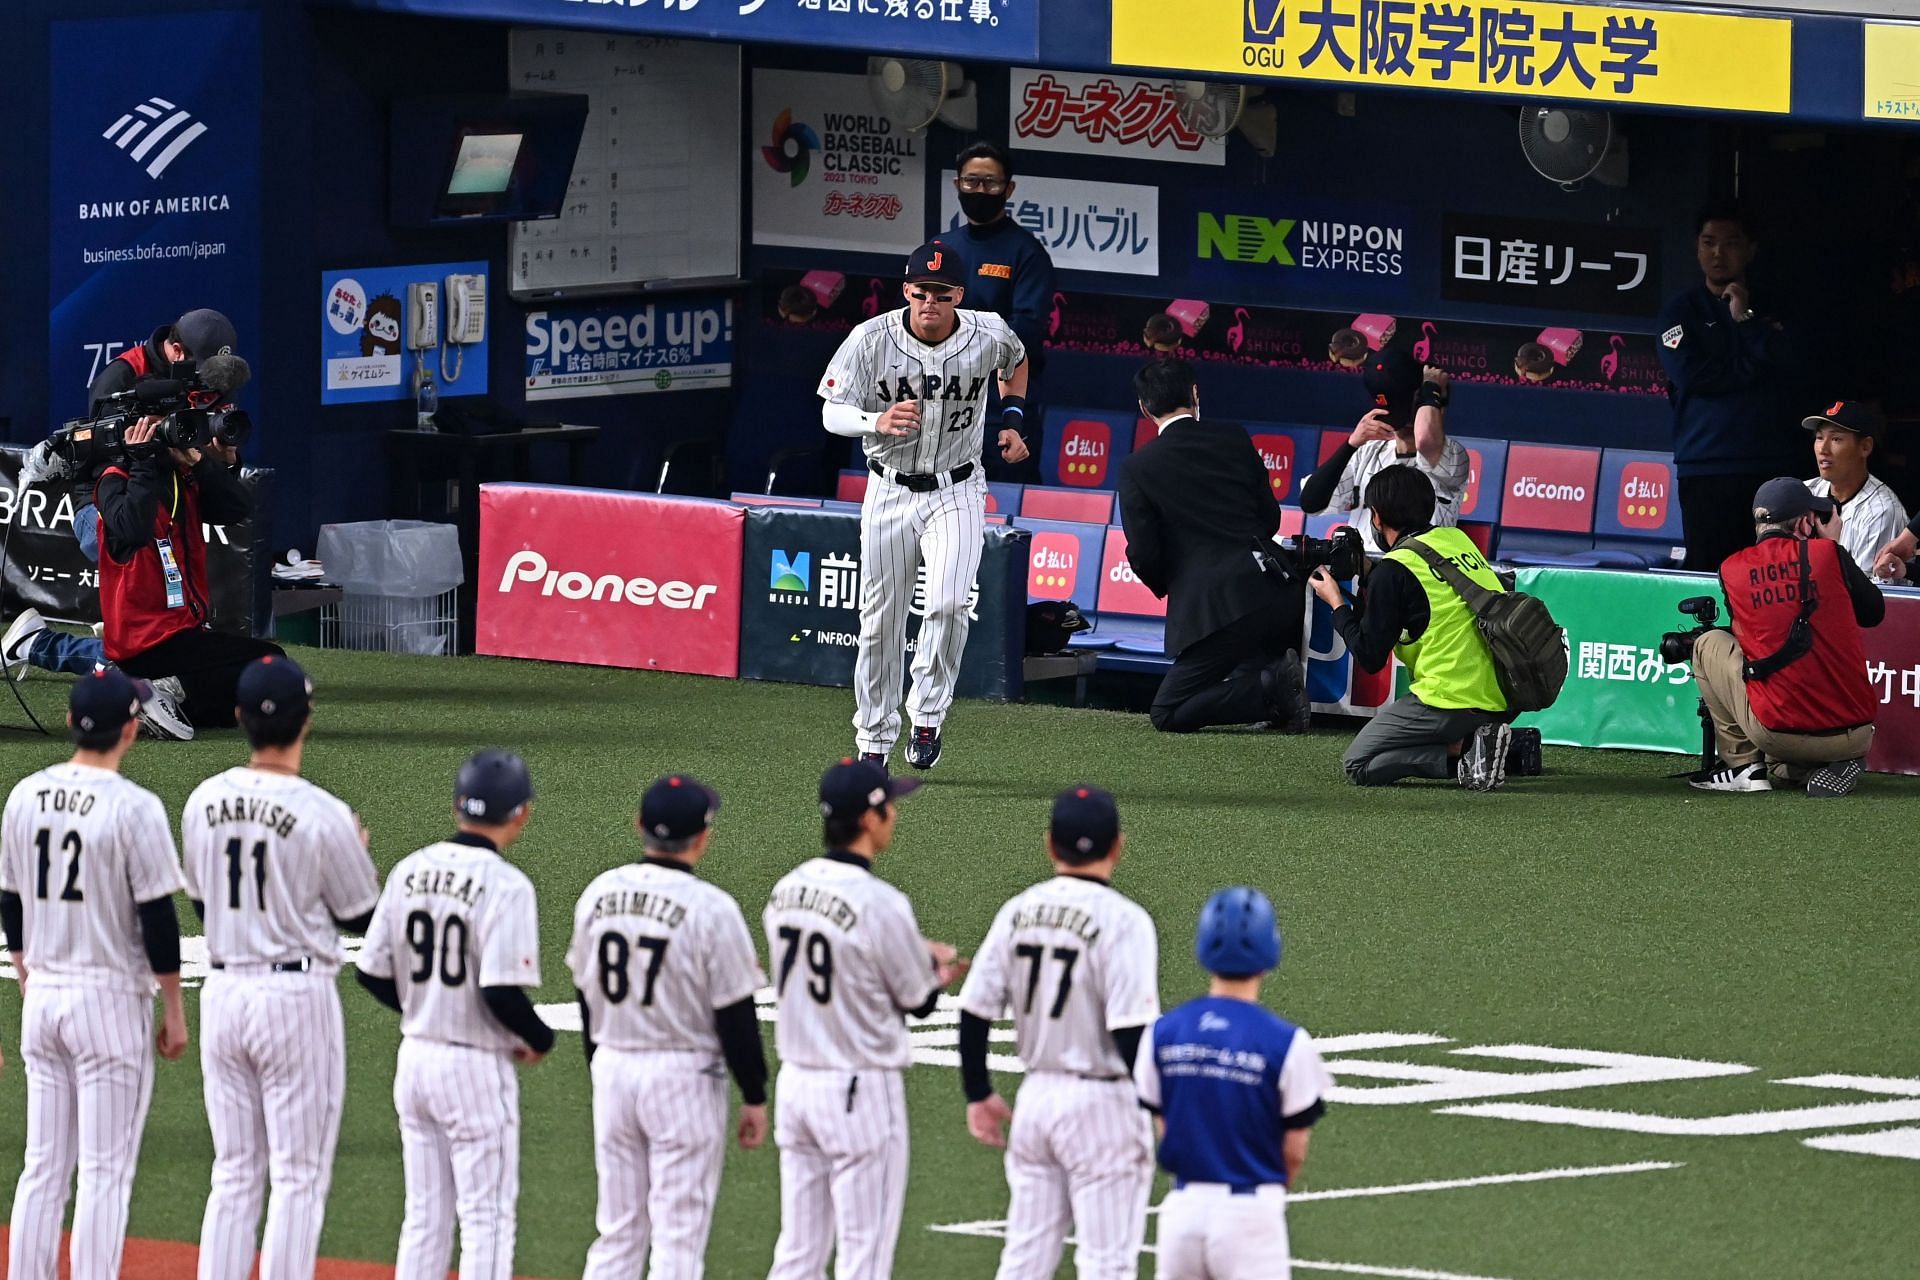 Outfielder Lars Nootbaar #23 of Japan is introduced prior to the World Baseball Classic exhibition game